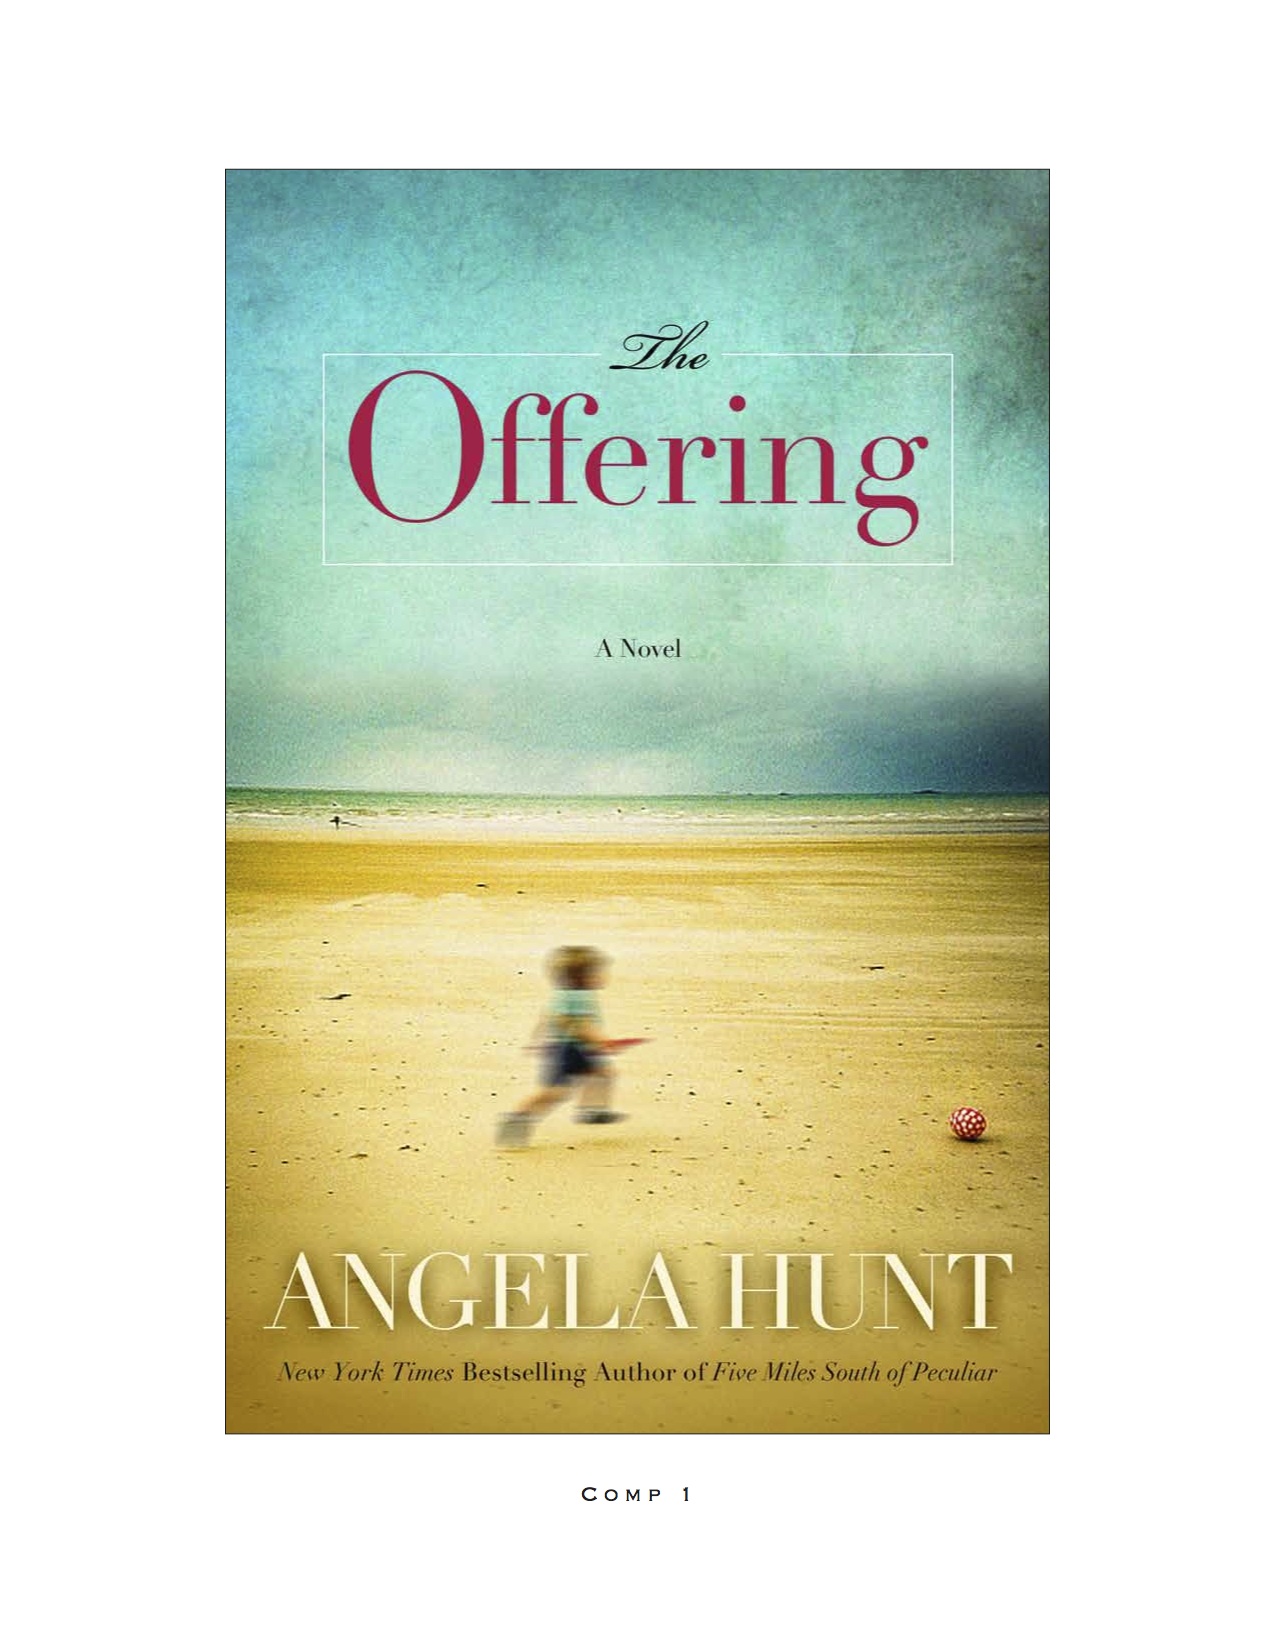 THE OFFERING–a surrogate story on the “Blog Hop Tour.”